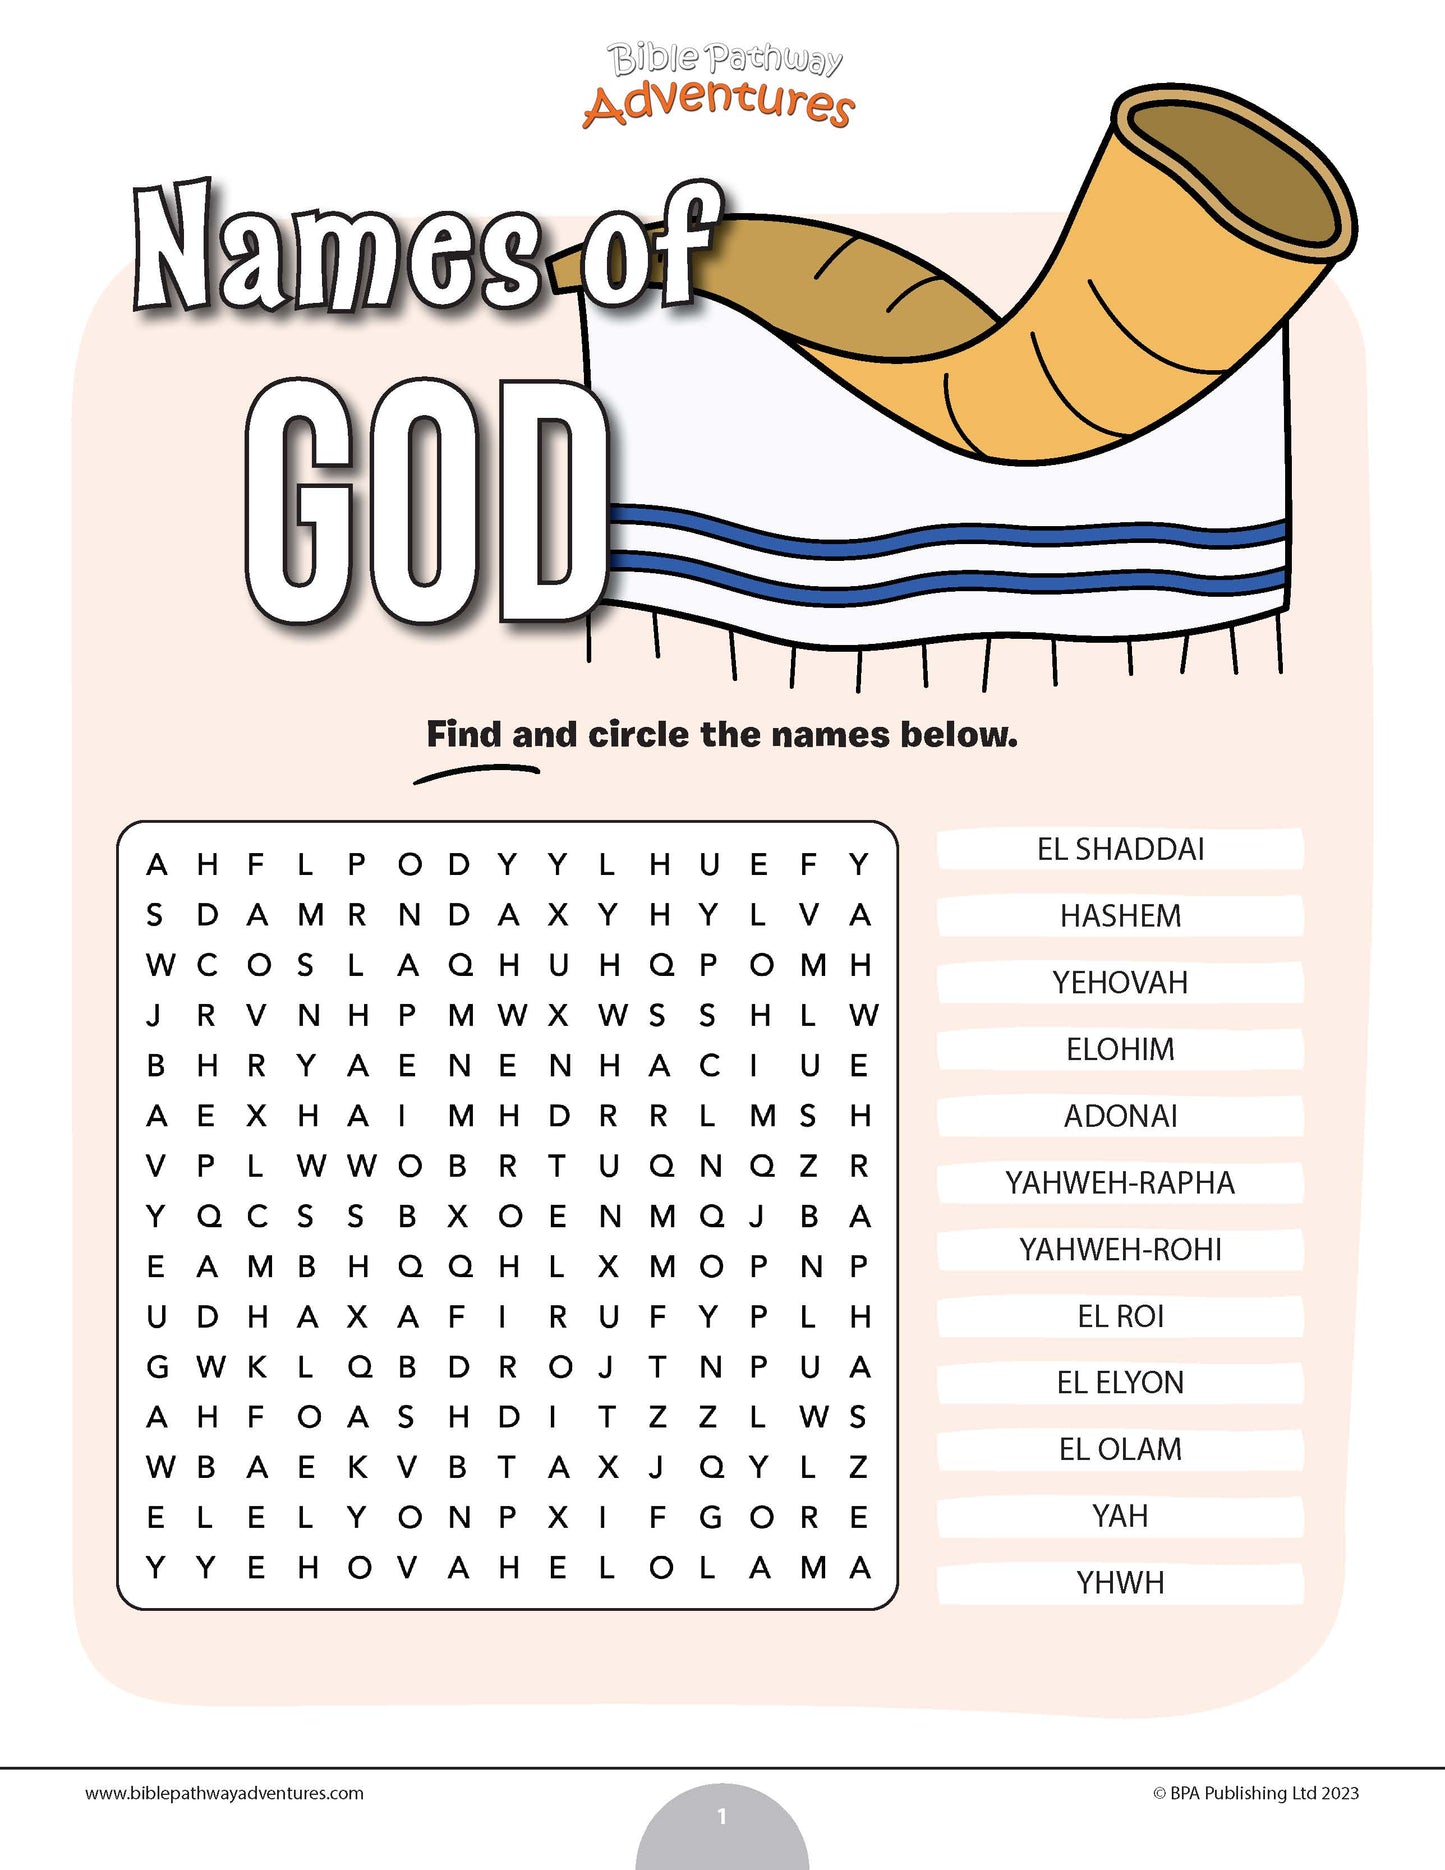 Names of God word search (PDF)